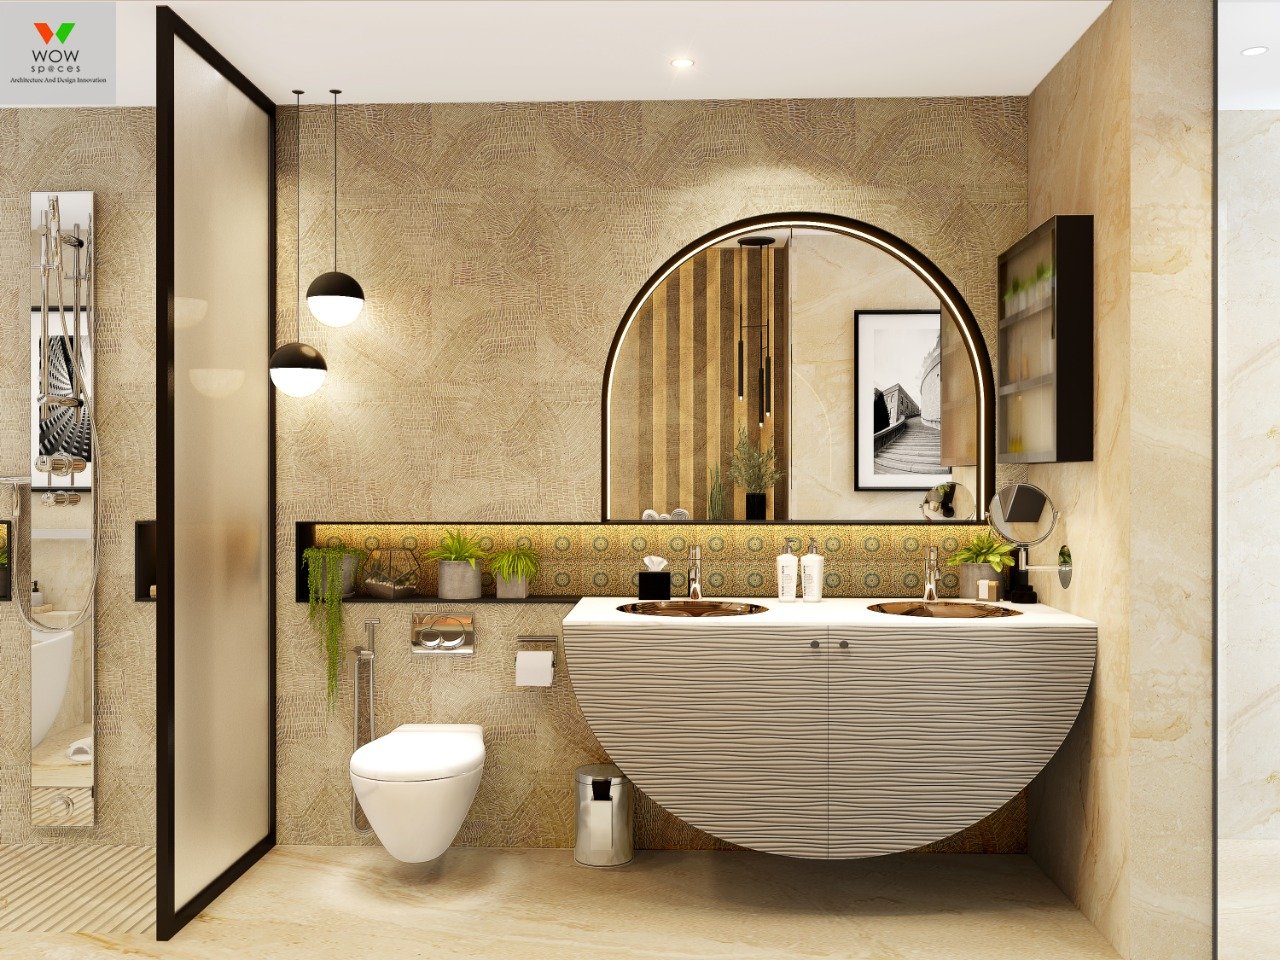 <span  class="uc_style_uc_tiles_grid_image_elementor_uc_items_attribute_title" style="color:#ffffff;">BATHROOM 6</span>